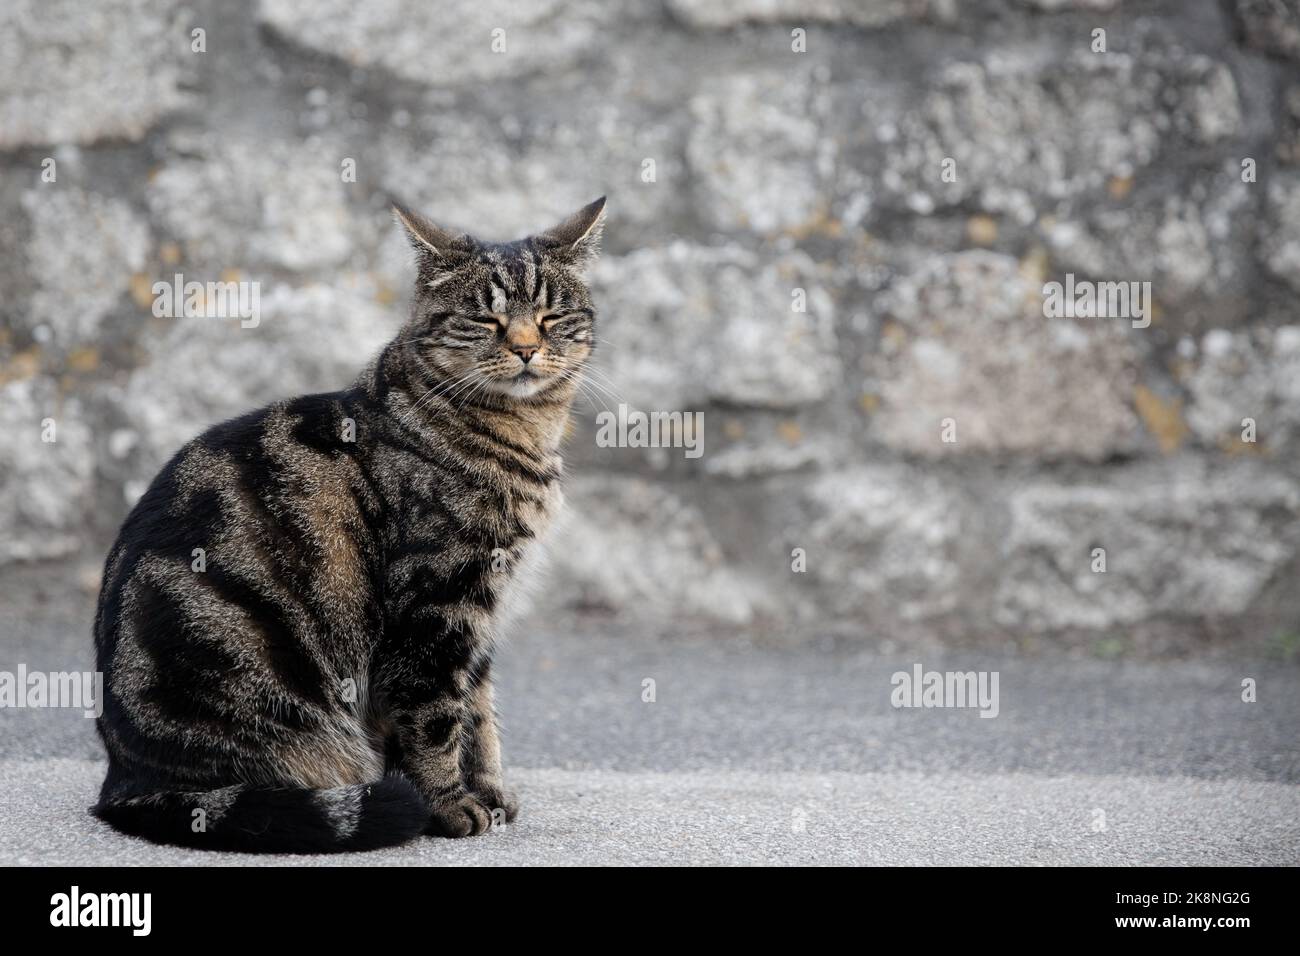 A tired and lazy Tabby Cat sitting on a city street with its eyes close Stock Photo